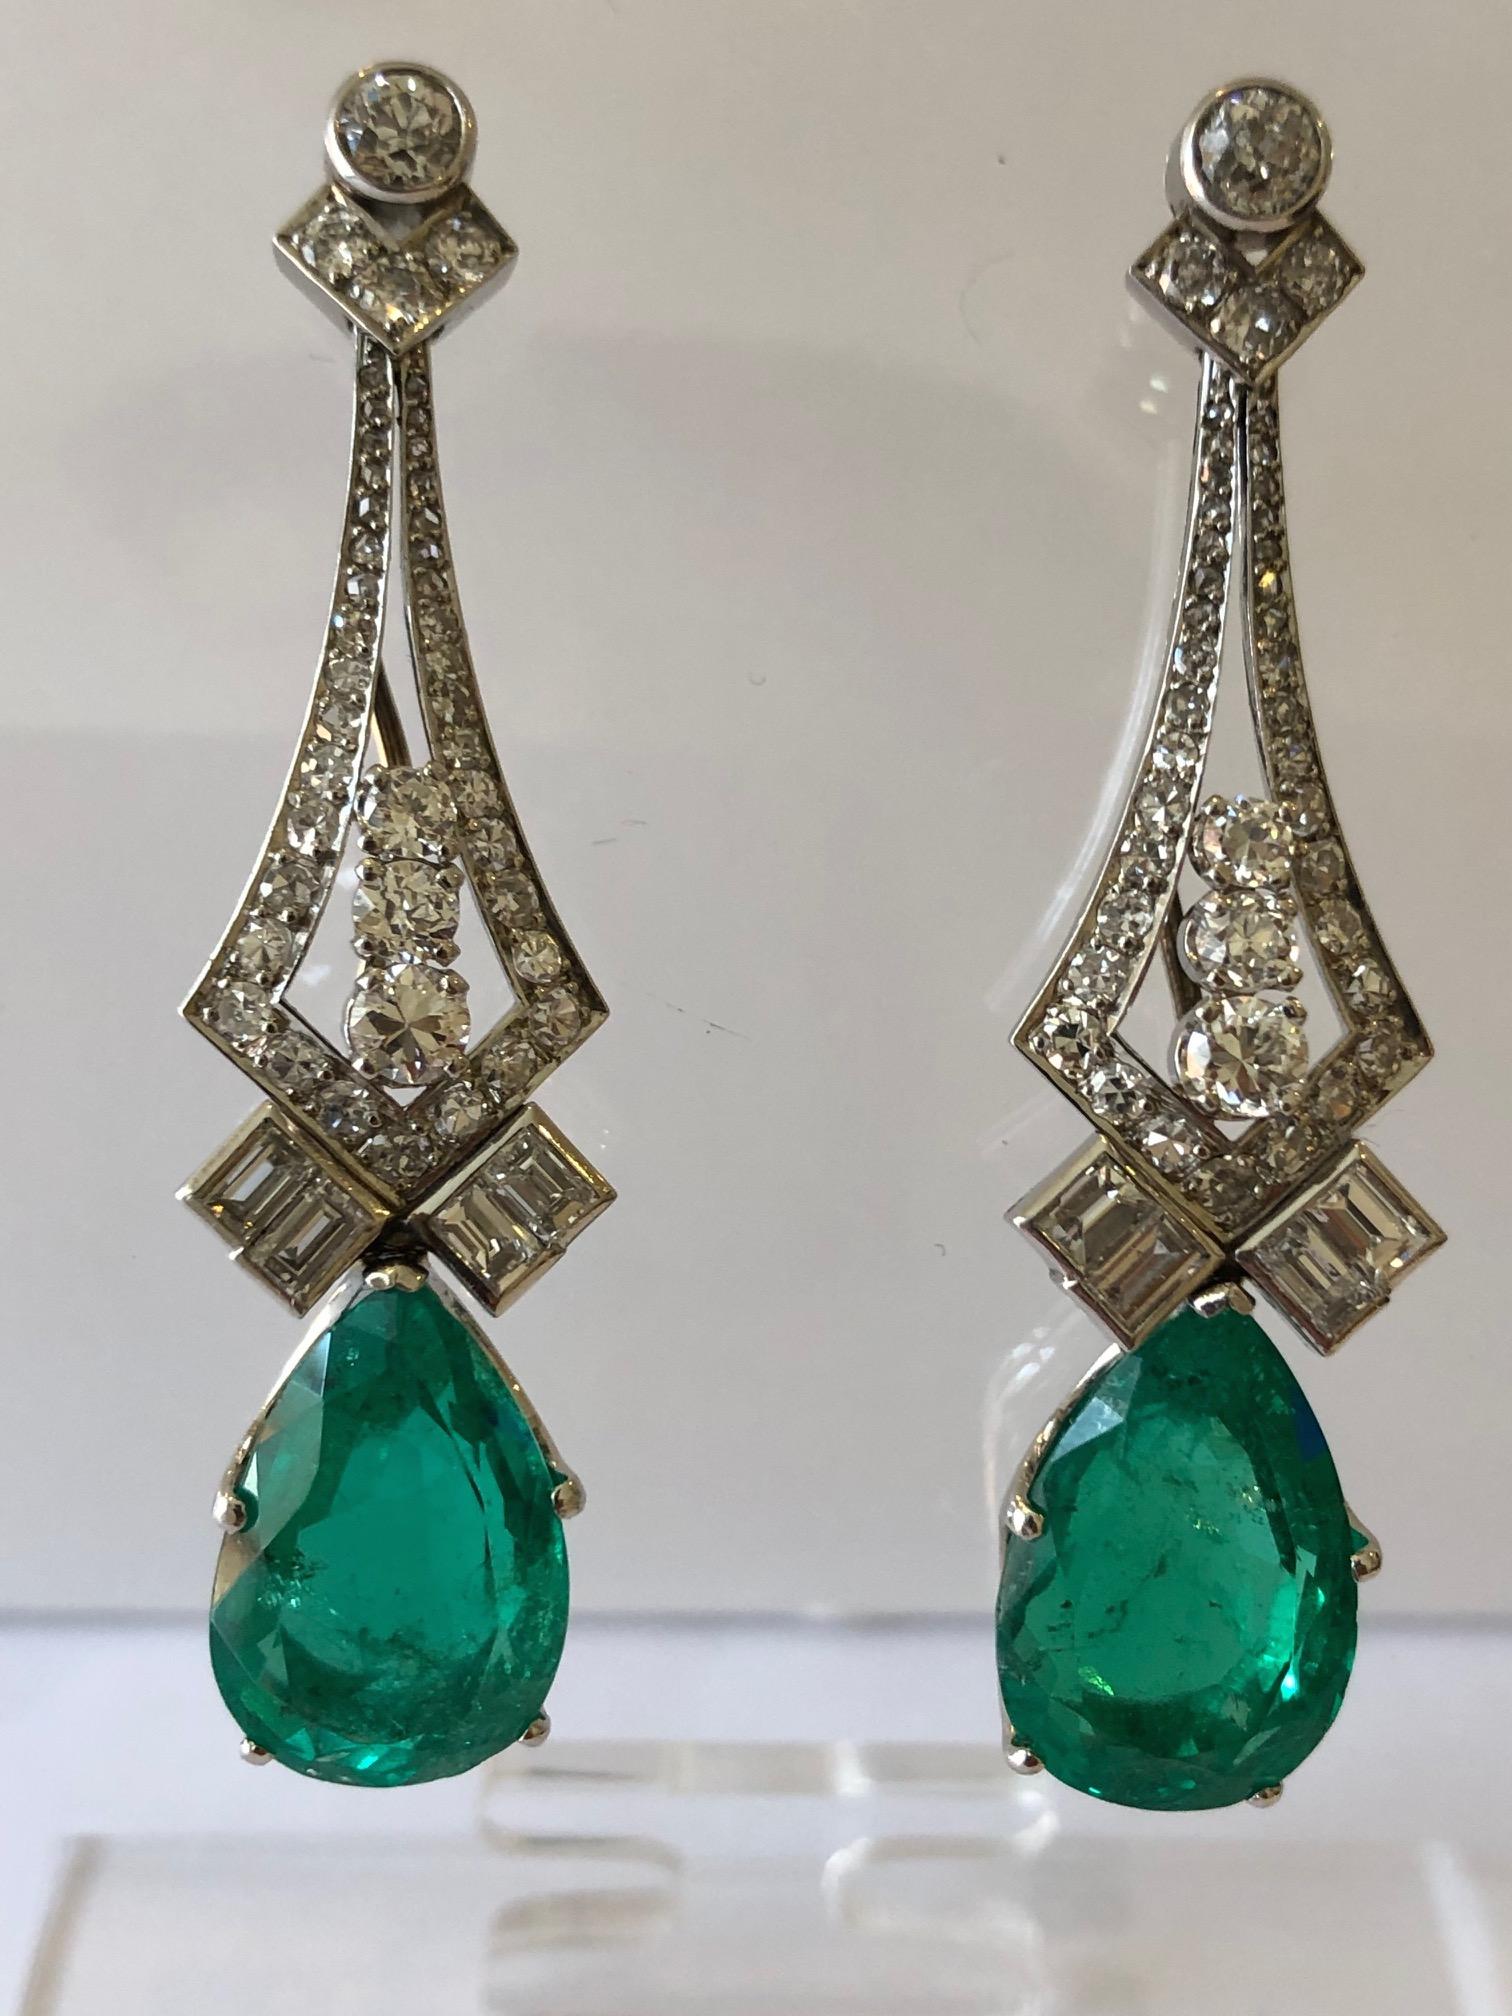 Pair of No Oil Colombian Emerald and Diamond Drop Earrings Certificated by GRS In Good Condition For Sale In Mayfair, GB